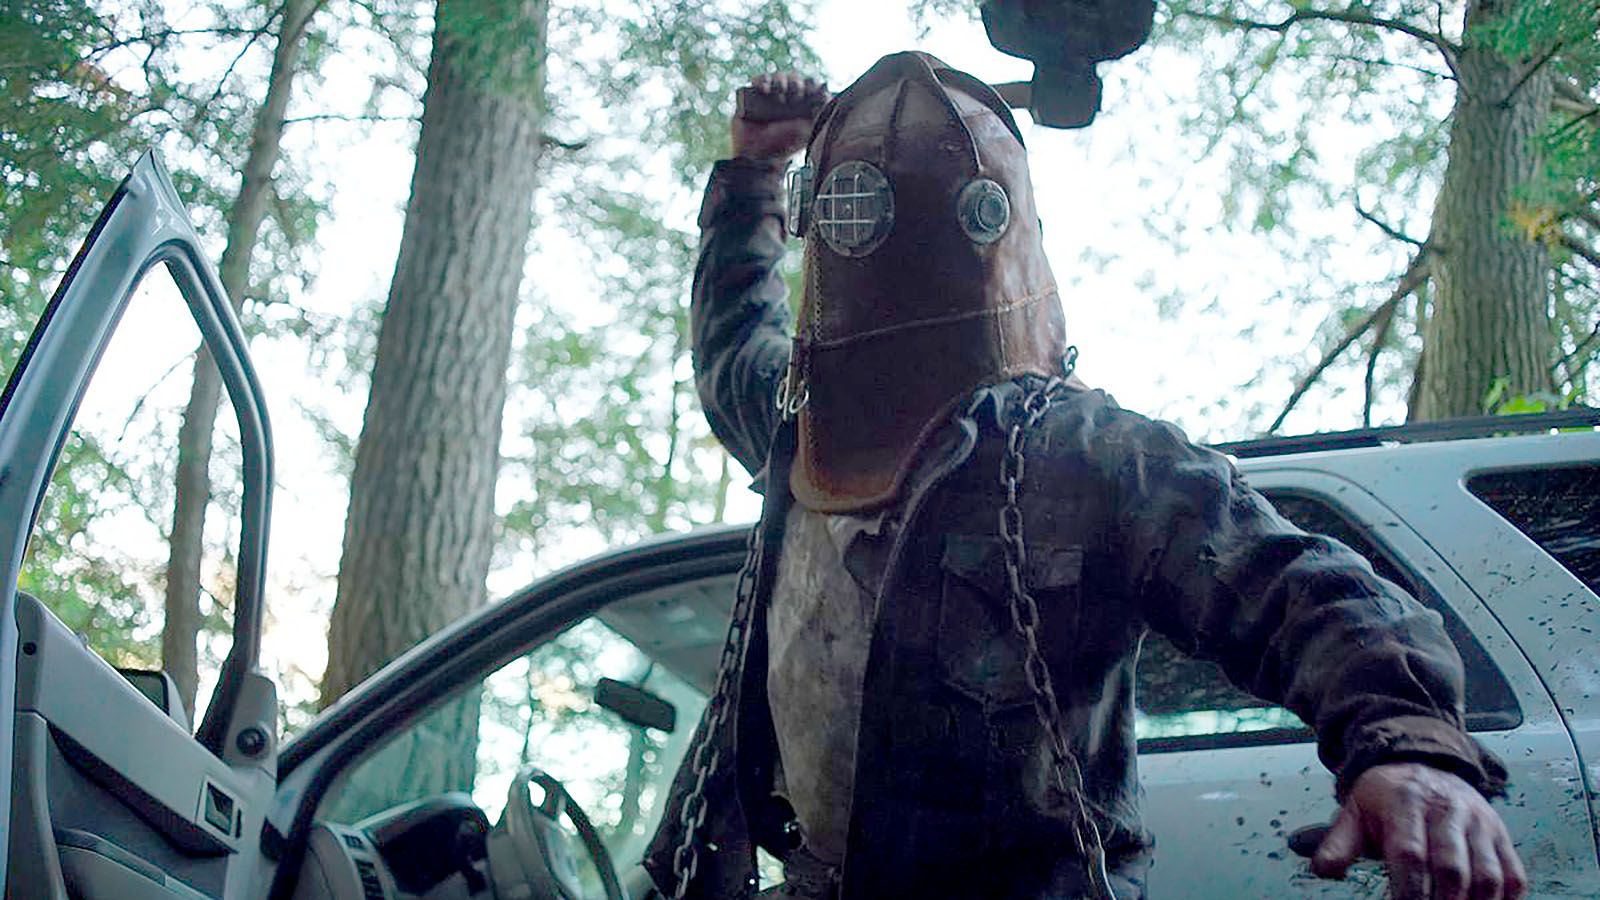 Ry Barrett portrays a zombified madman on a killing spree in the new slasher film In a Violent Nature.